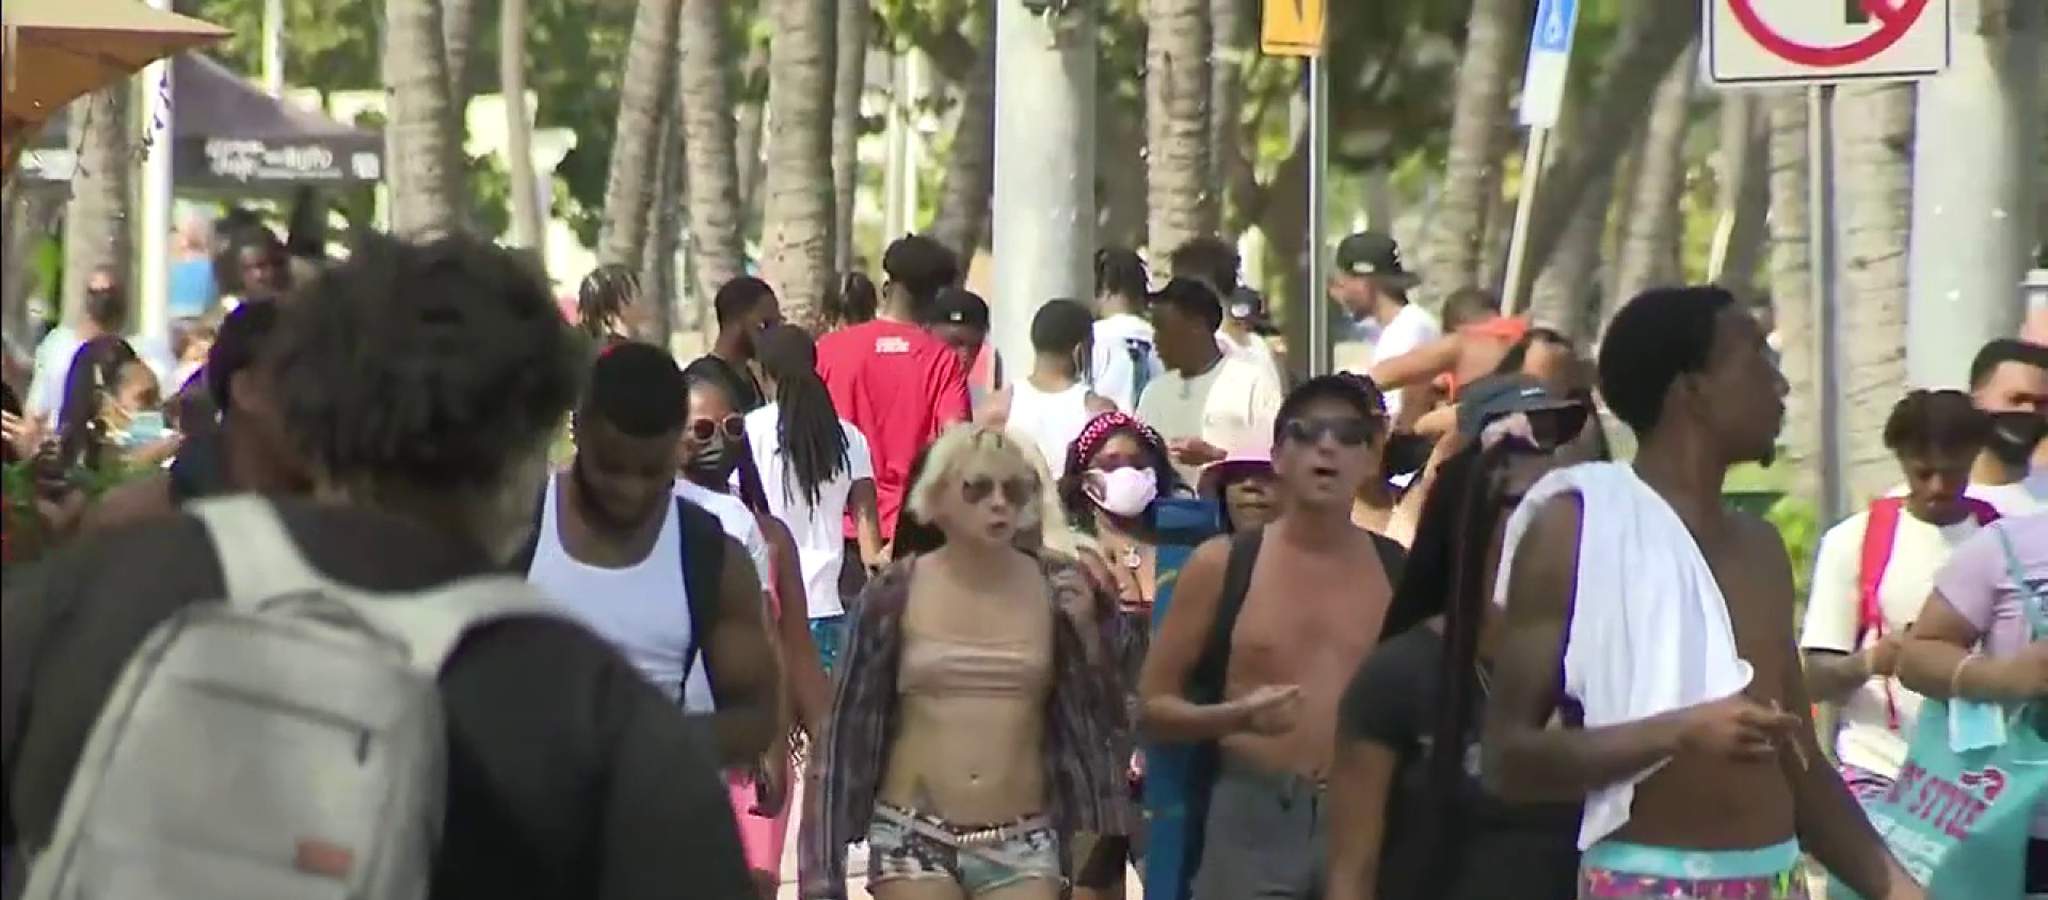 Miami Beach: Curfew, causeway closures extended through April 12 to control unruly crowds